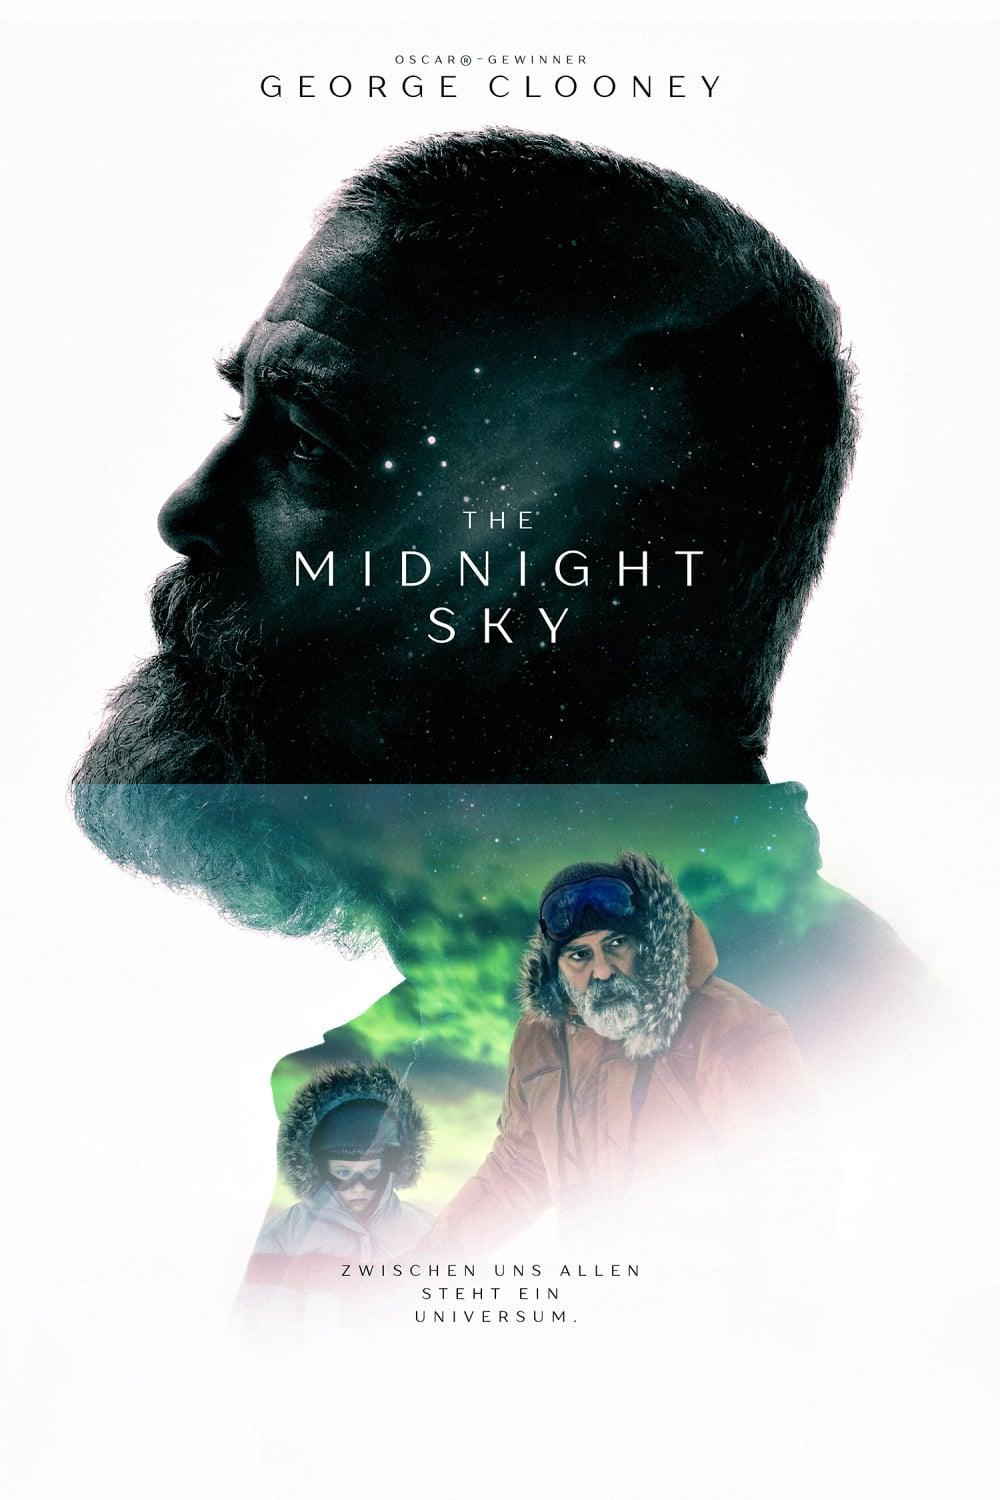 The Midnight Sky poster